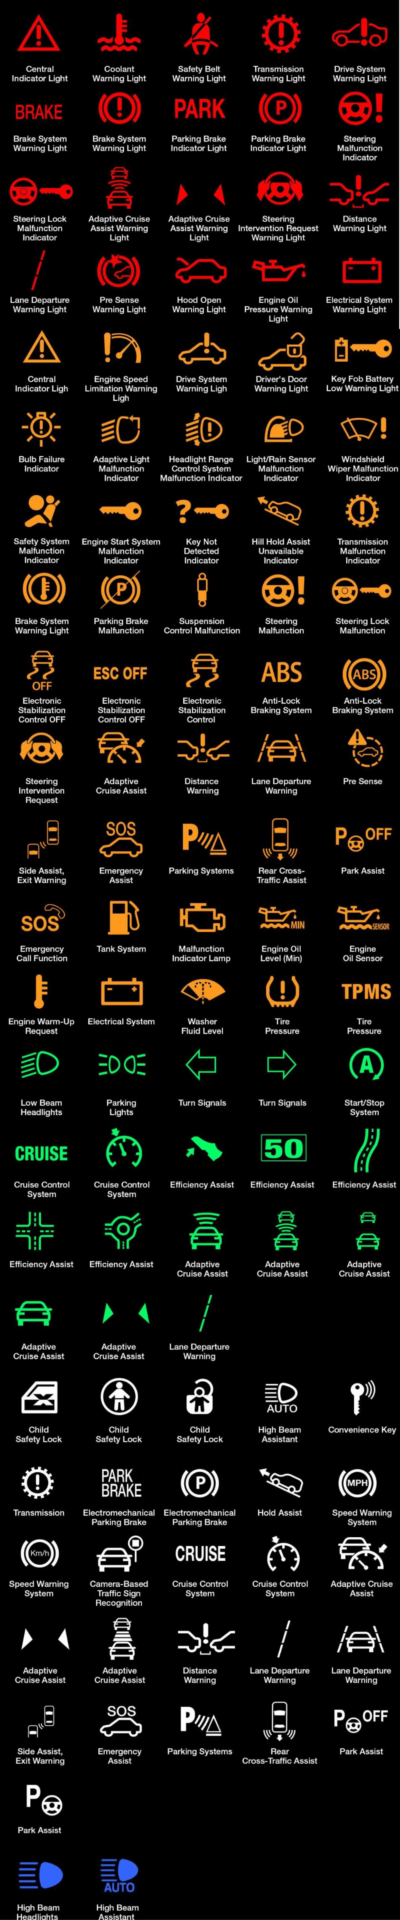 Jeep Wrangler dashboard symbols and meanings